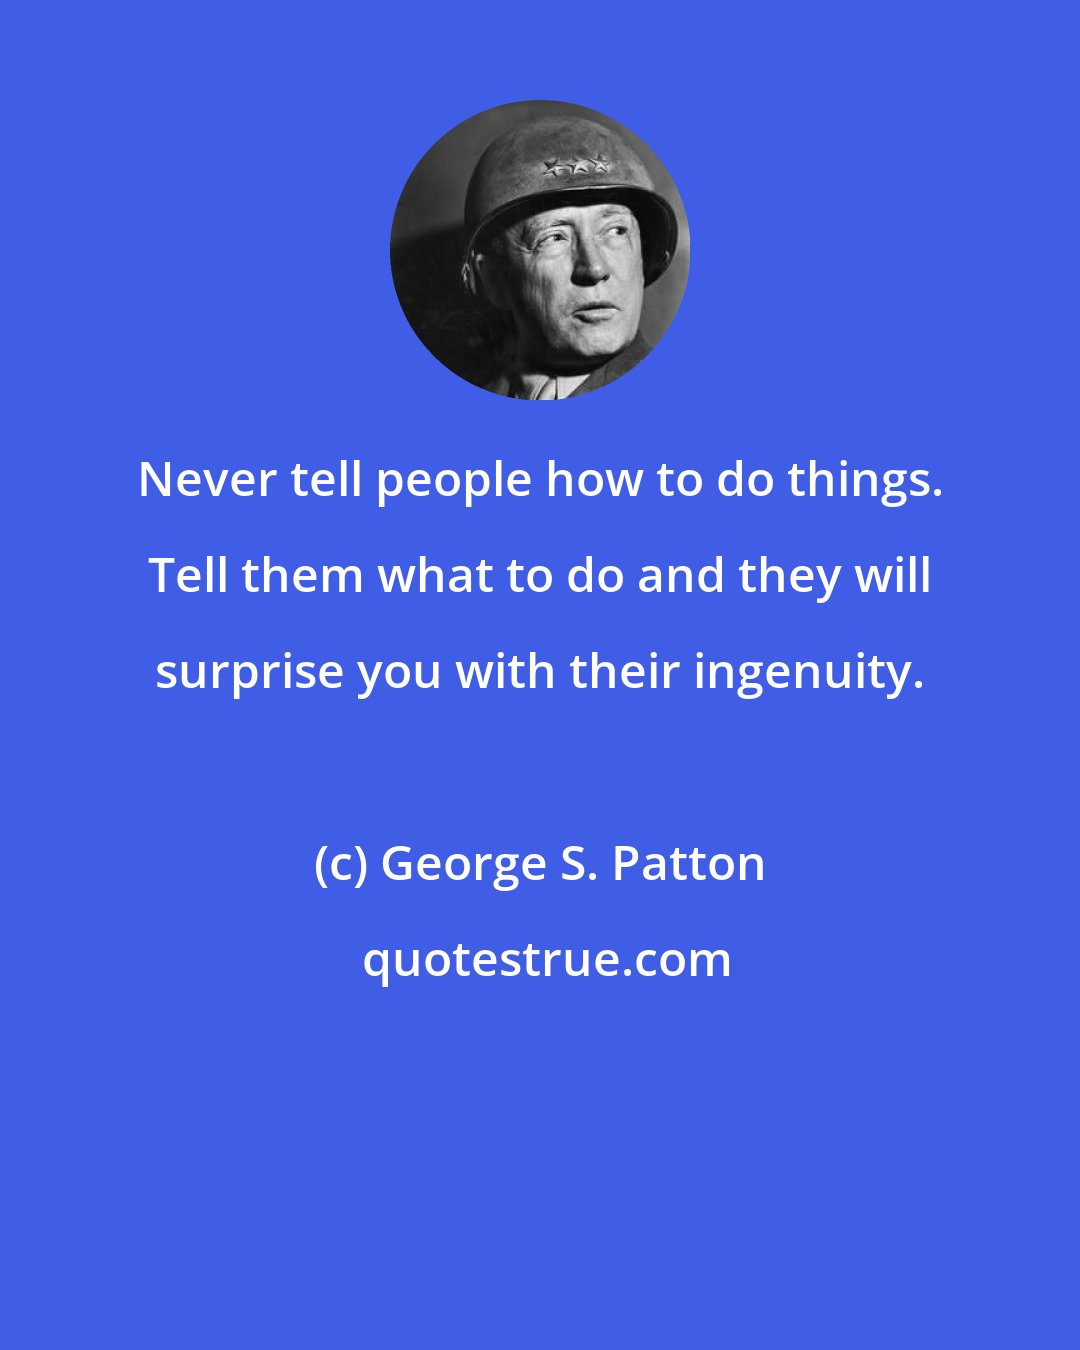 George S. Patton: Never tell people how to do things. Tell them what to do and they will surprise you with their ingenuity.